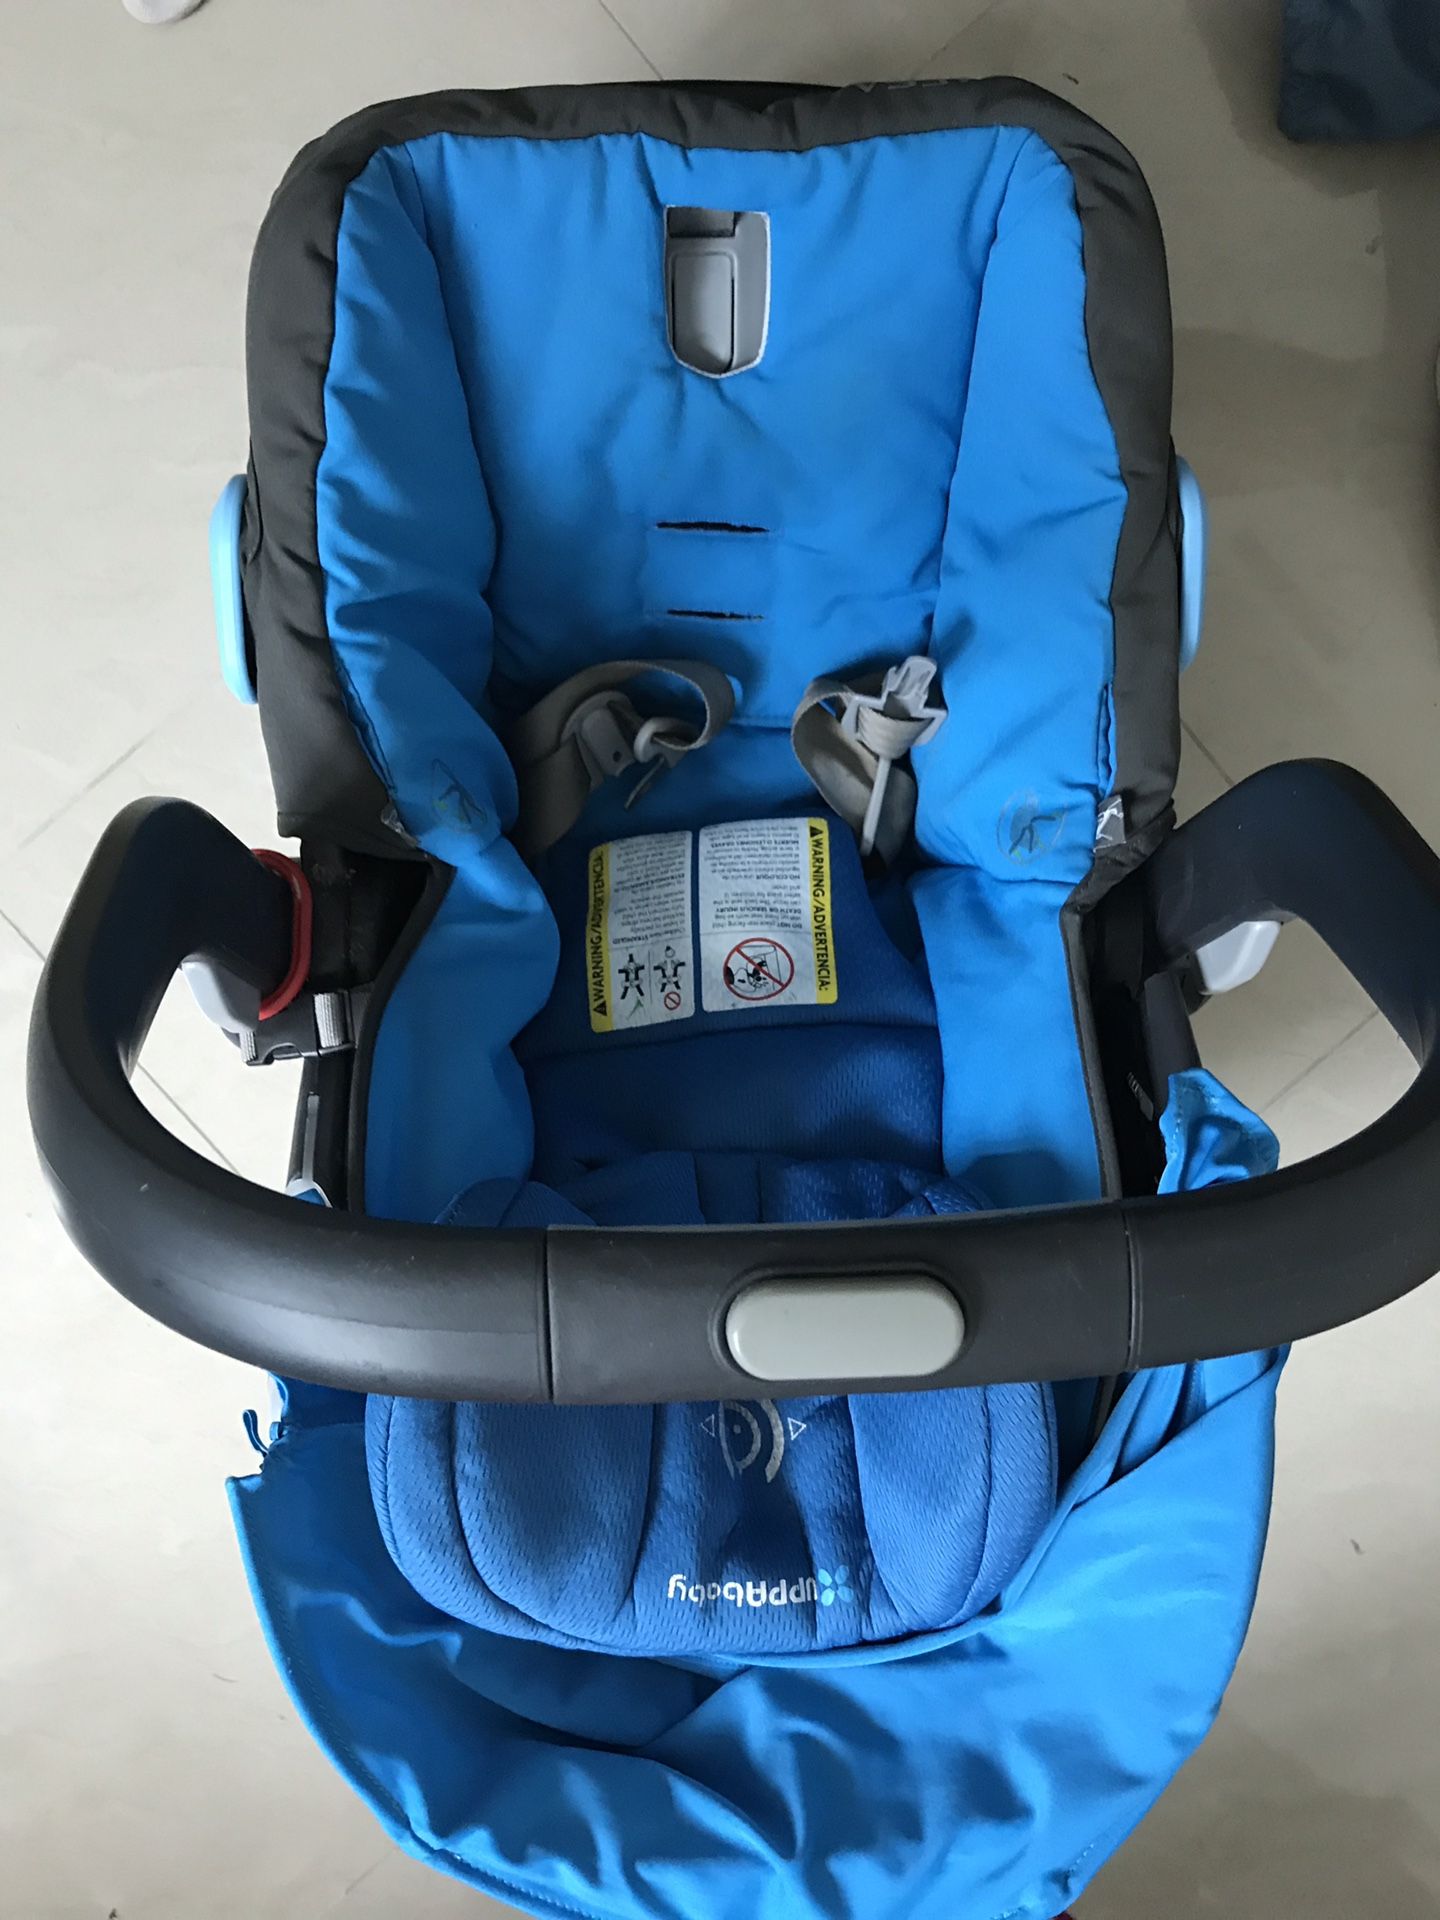 UPPAbaby car seat for babies - blue color